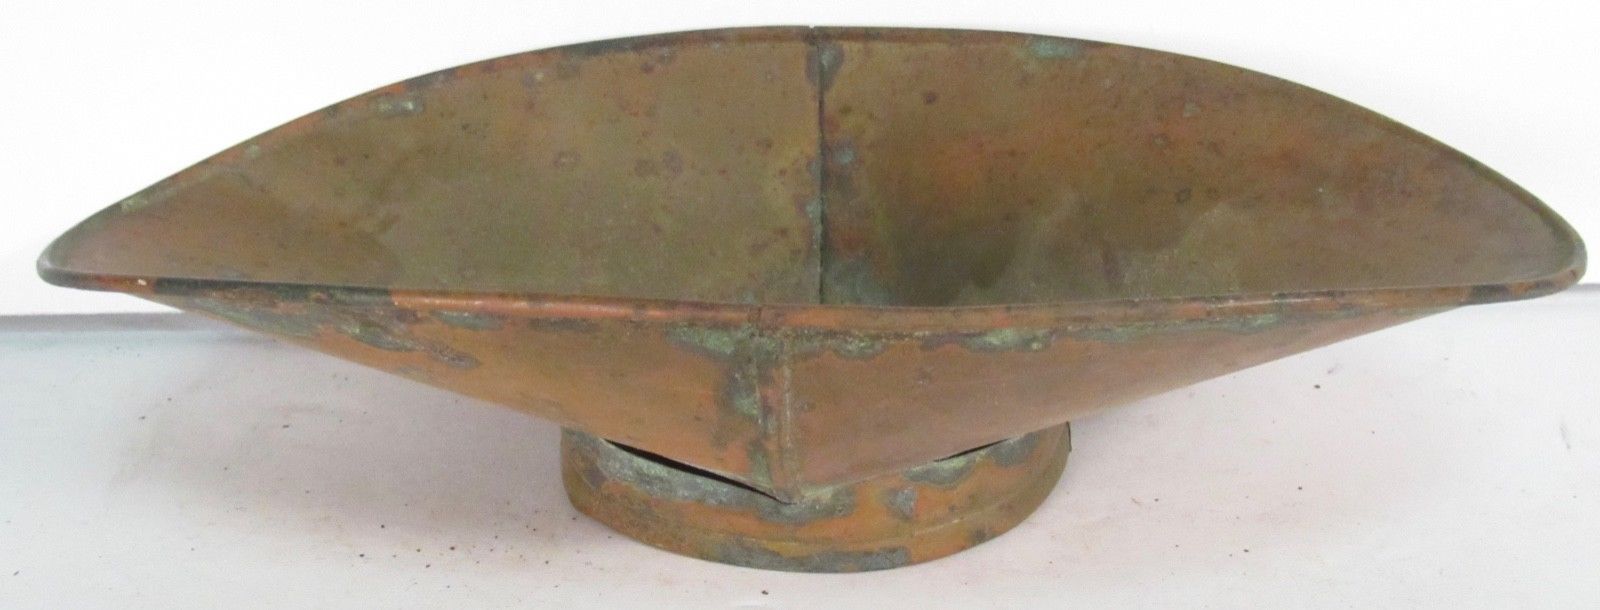 Antique General Store Brass Scale Pan Candy Hardware Tray Scoop